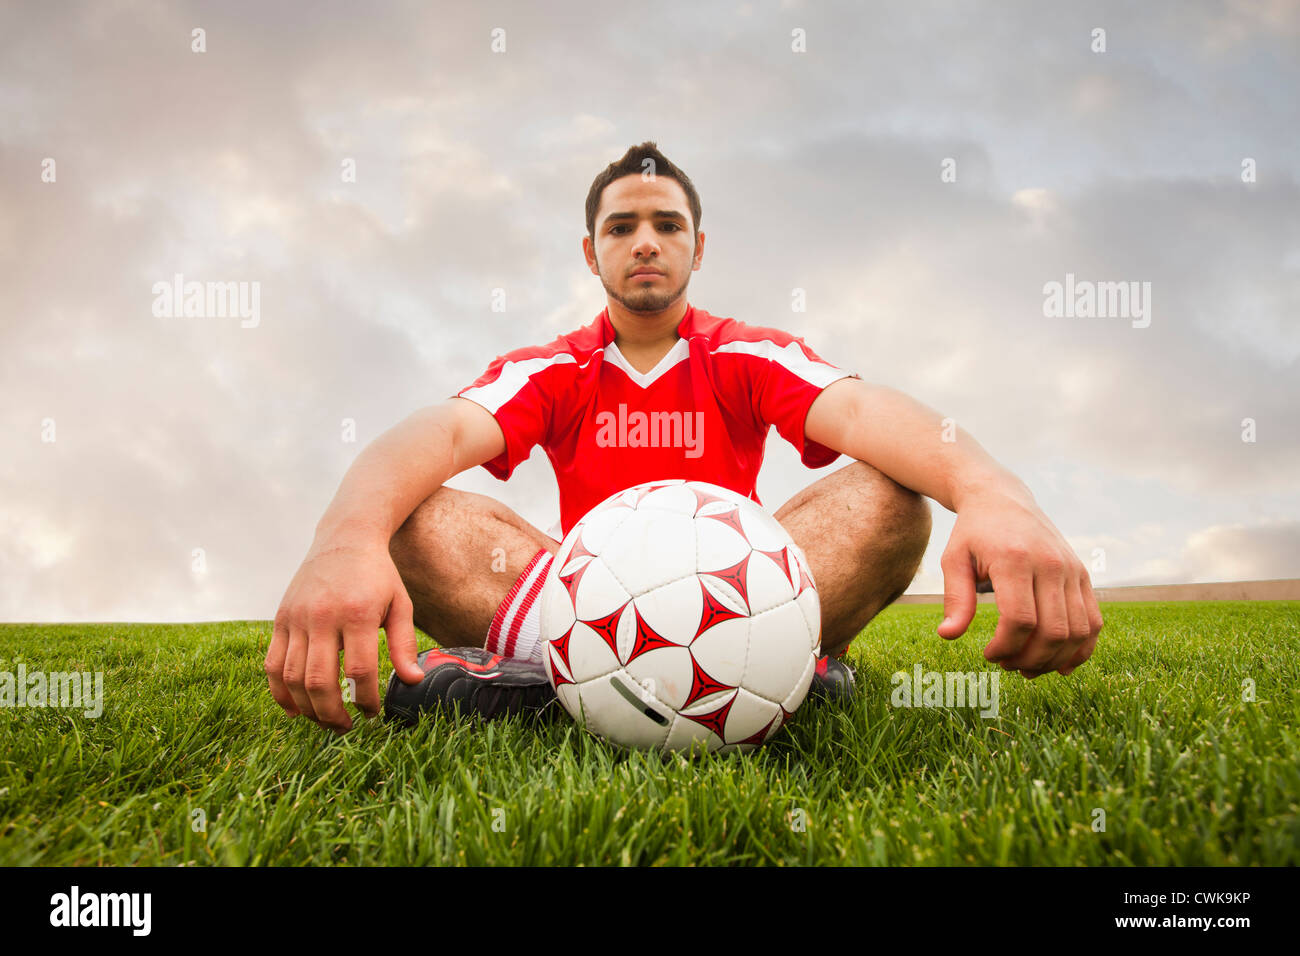 Hispanic soccer player sitting with ball Banque D'Images